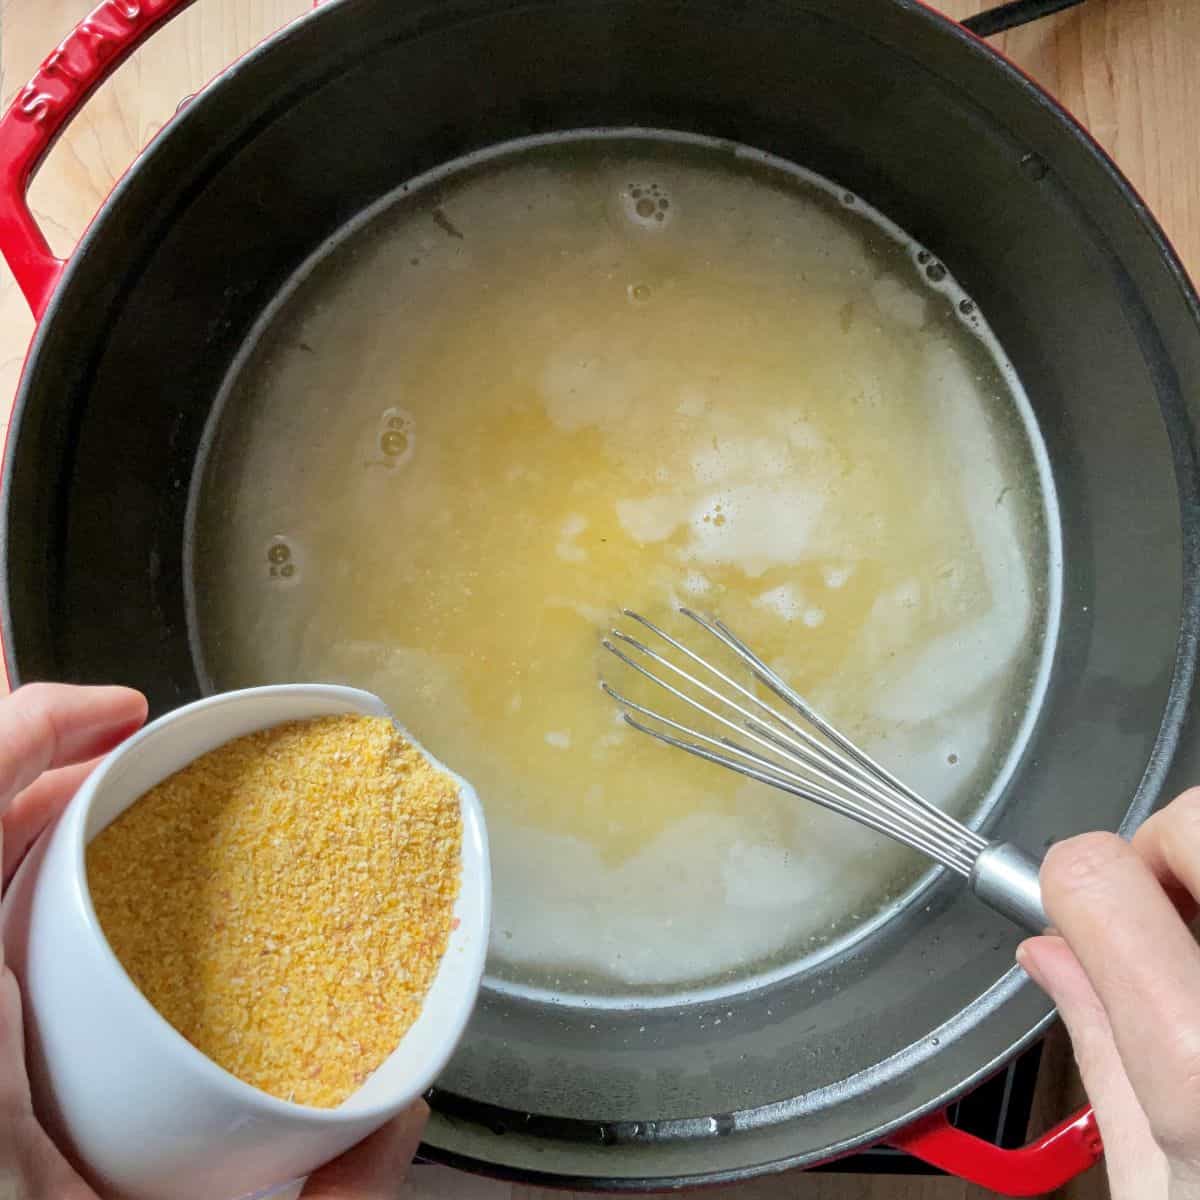 Polenta is slowly being poured in a pot of boiling water, ready to be whisked.